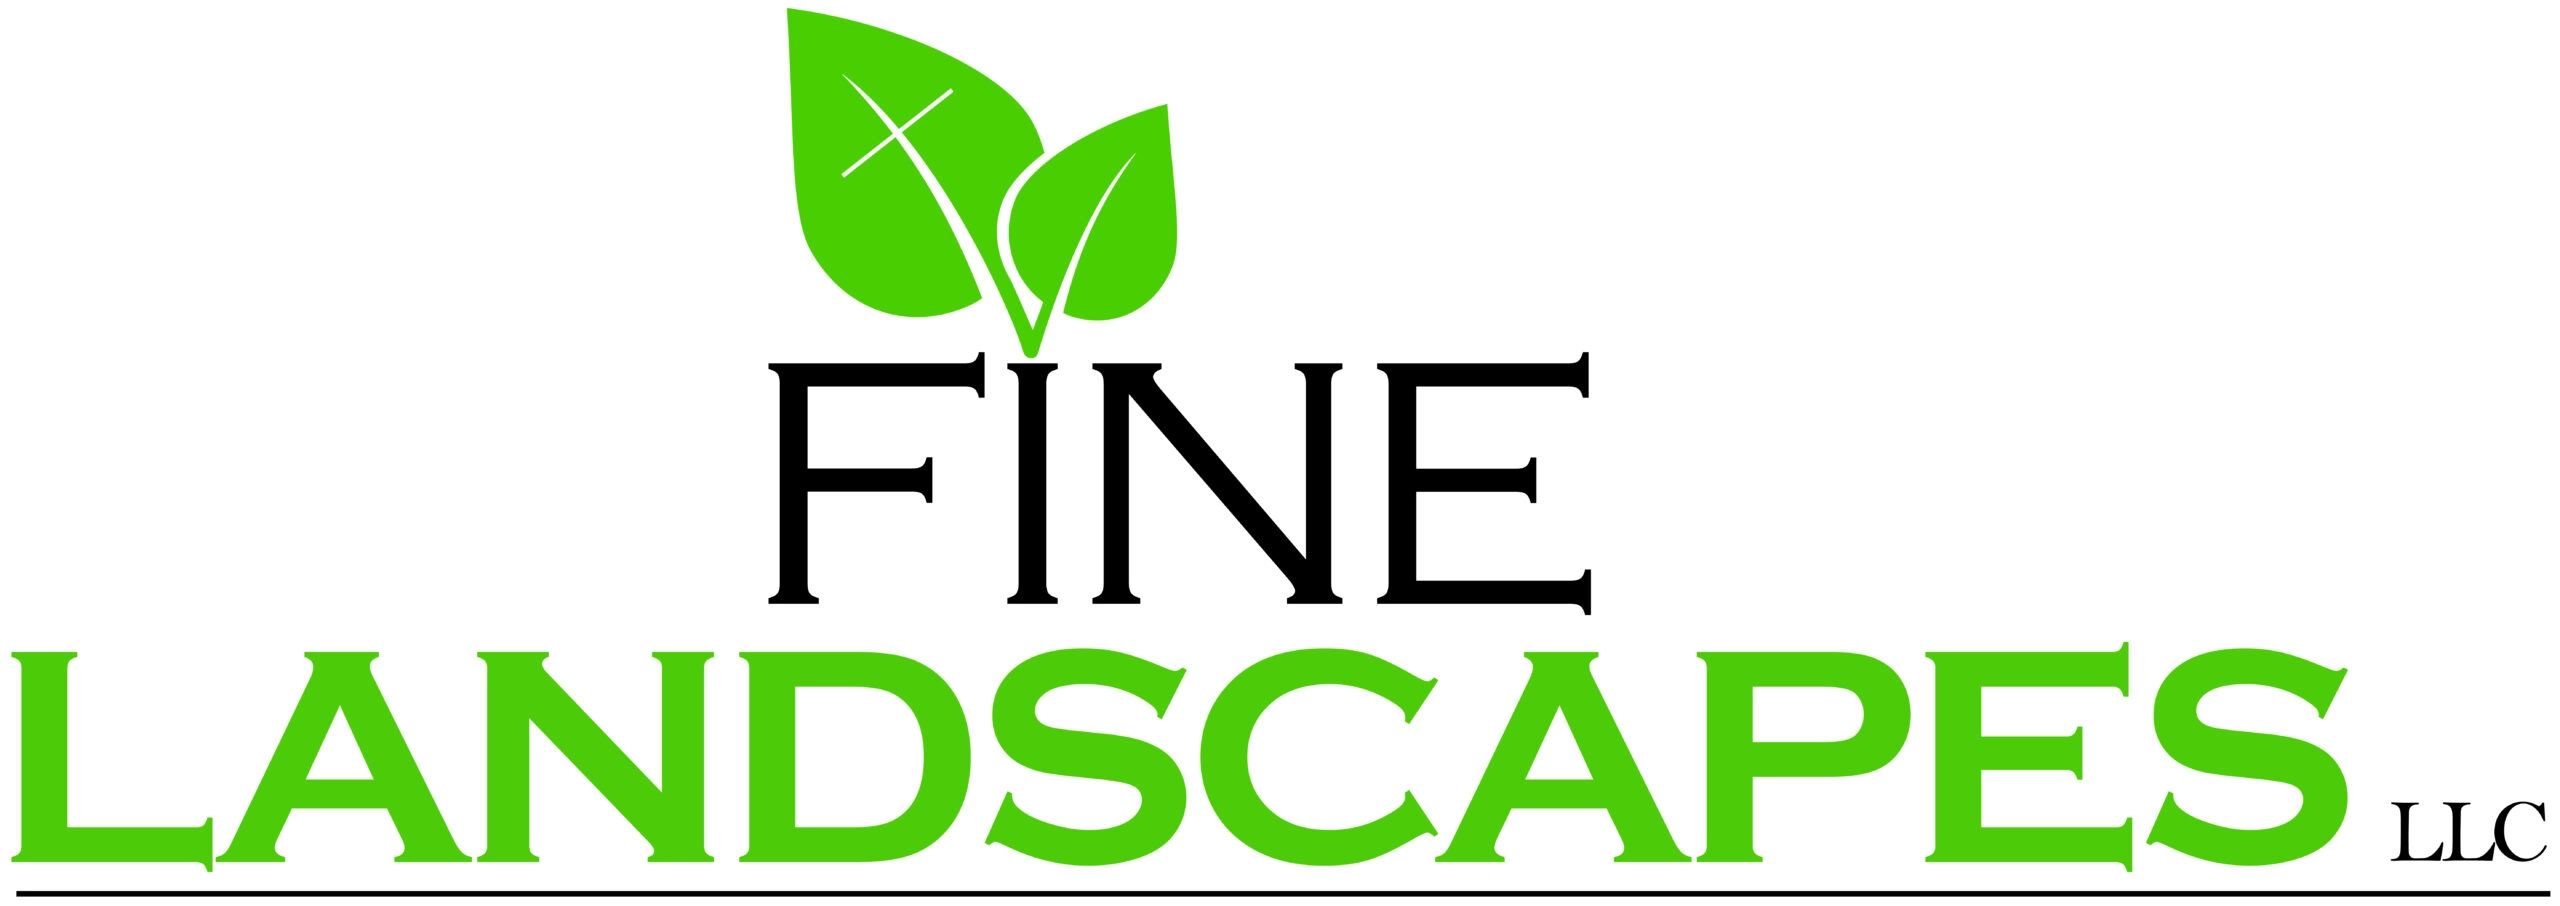 Fine Landscapes LLC | Landscaping Company In Blairstown, NJ Logo